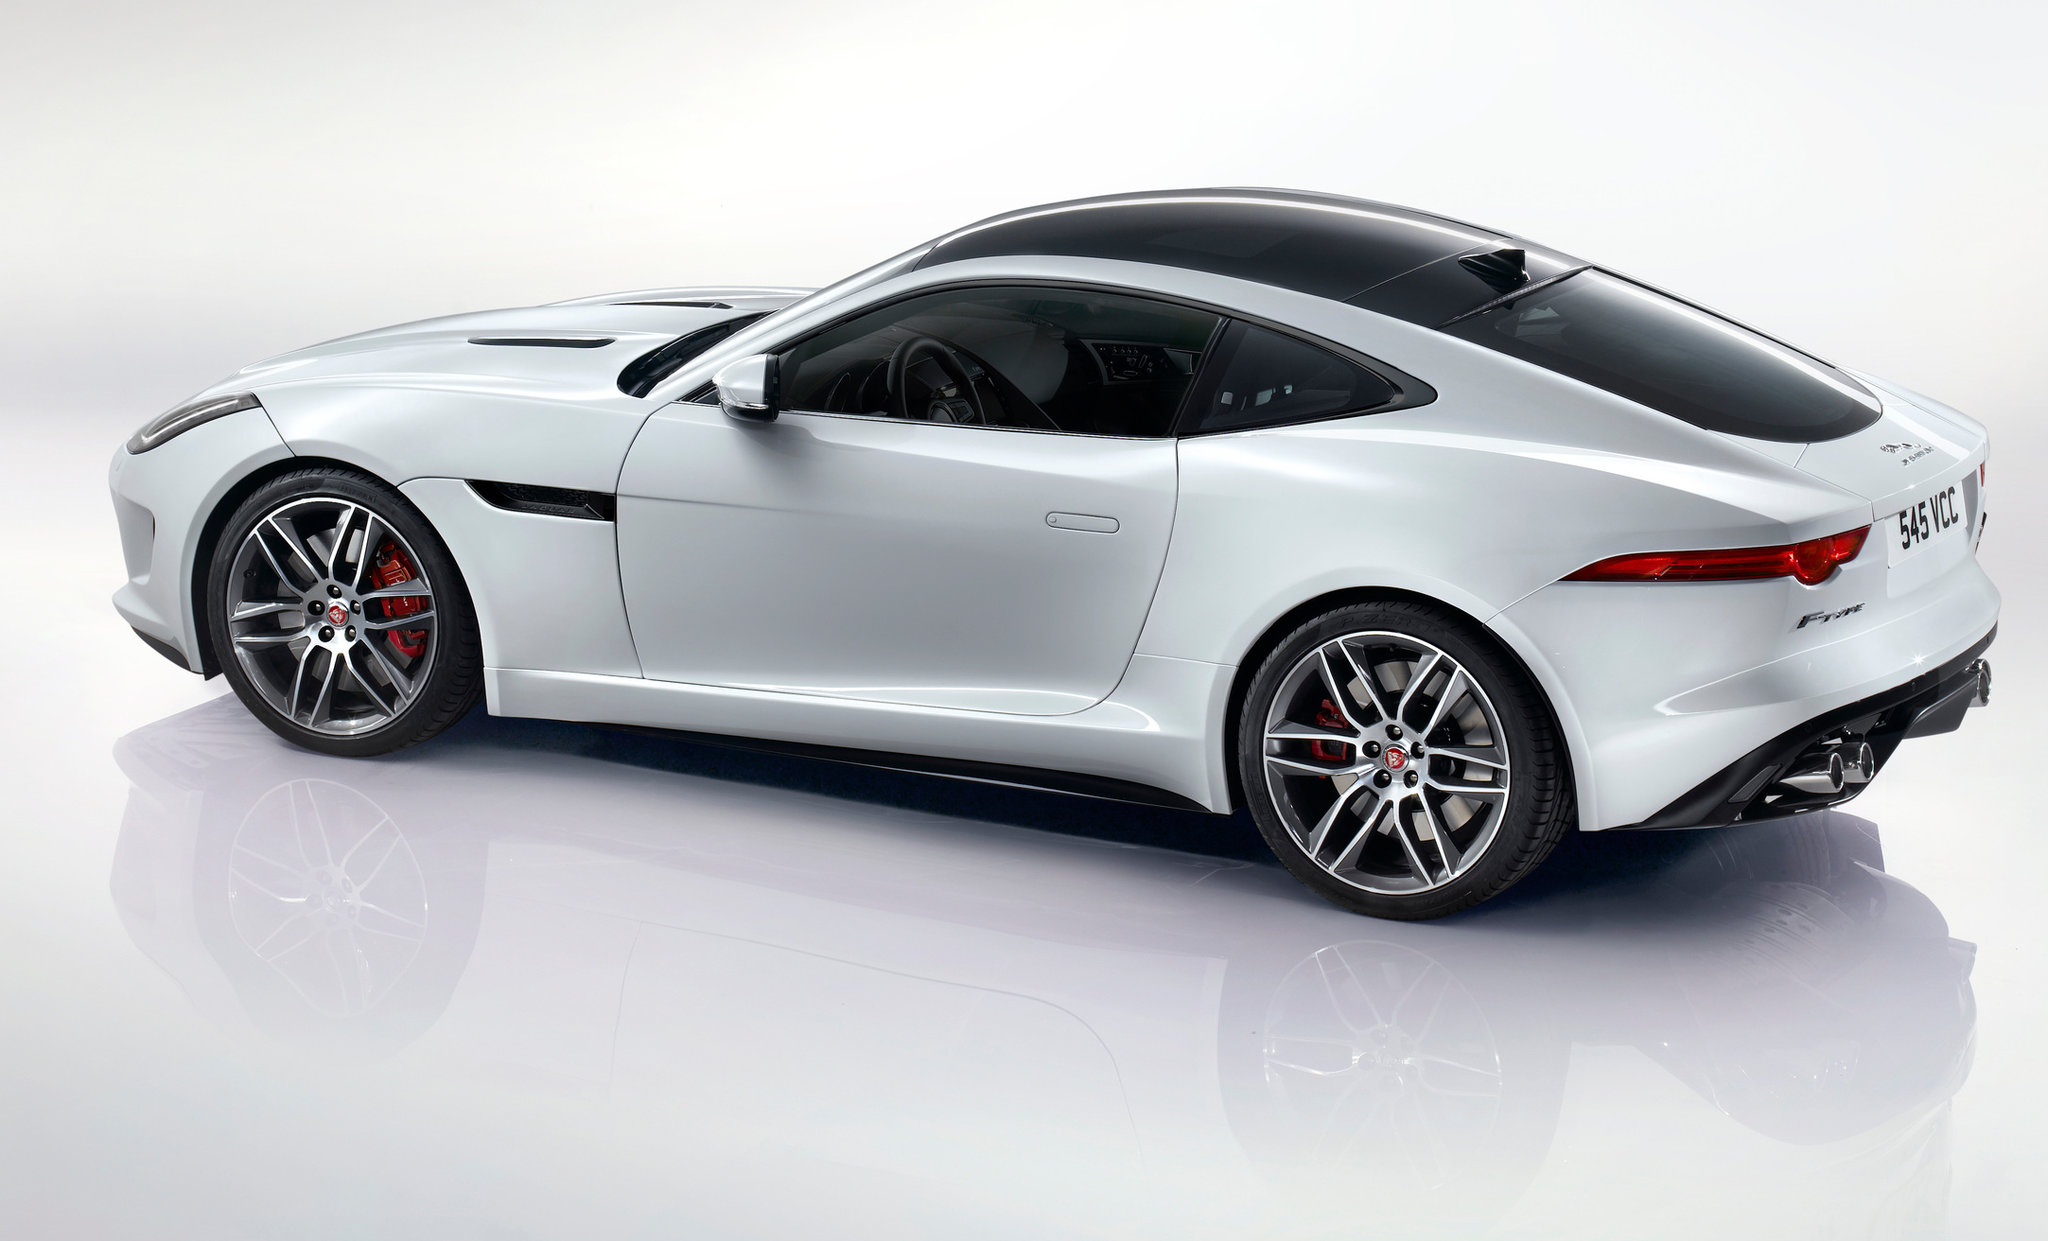 Review: 2015 Jaguar F-Type R coupe - The New York Times